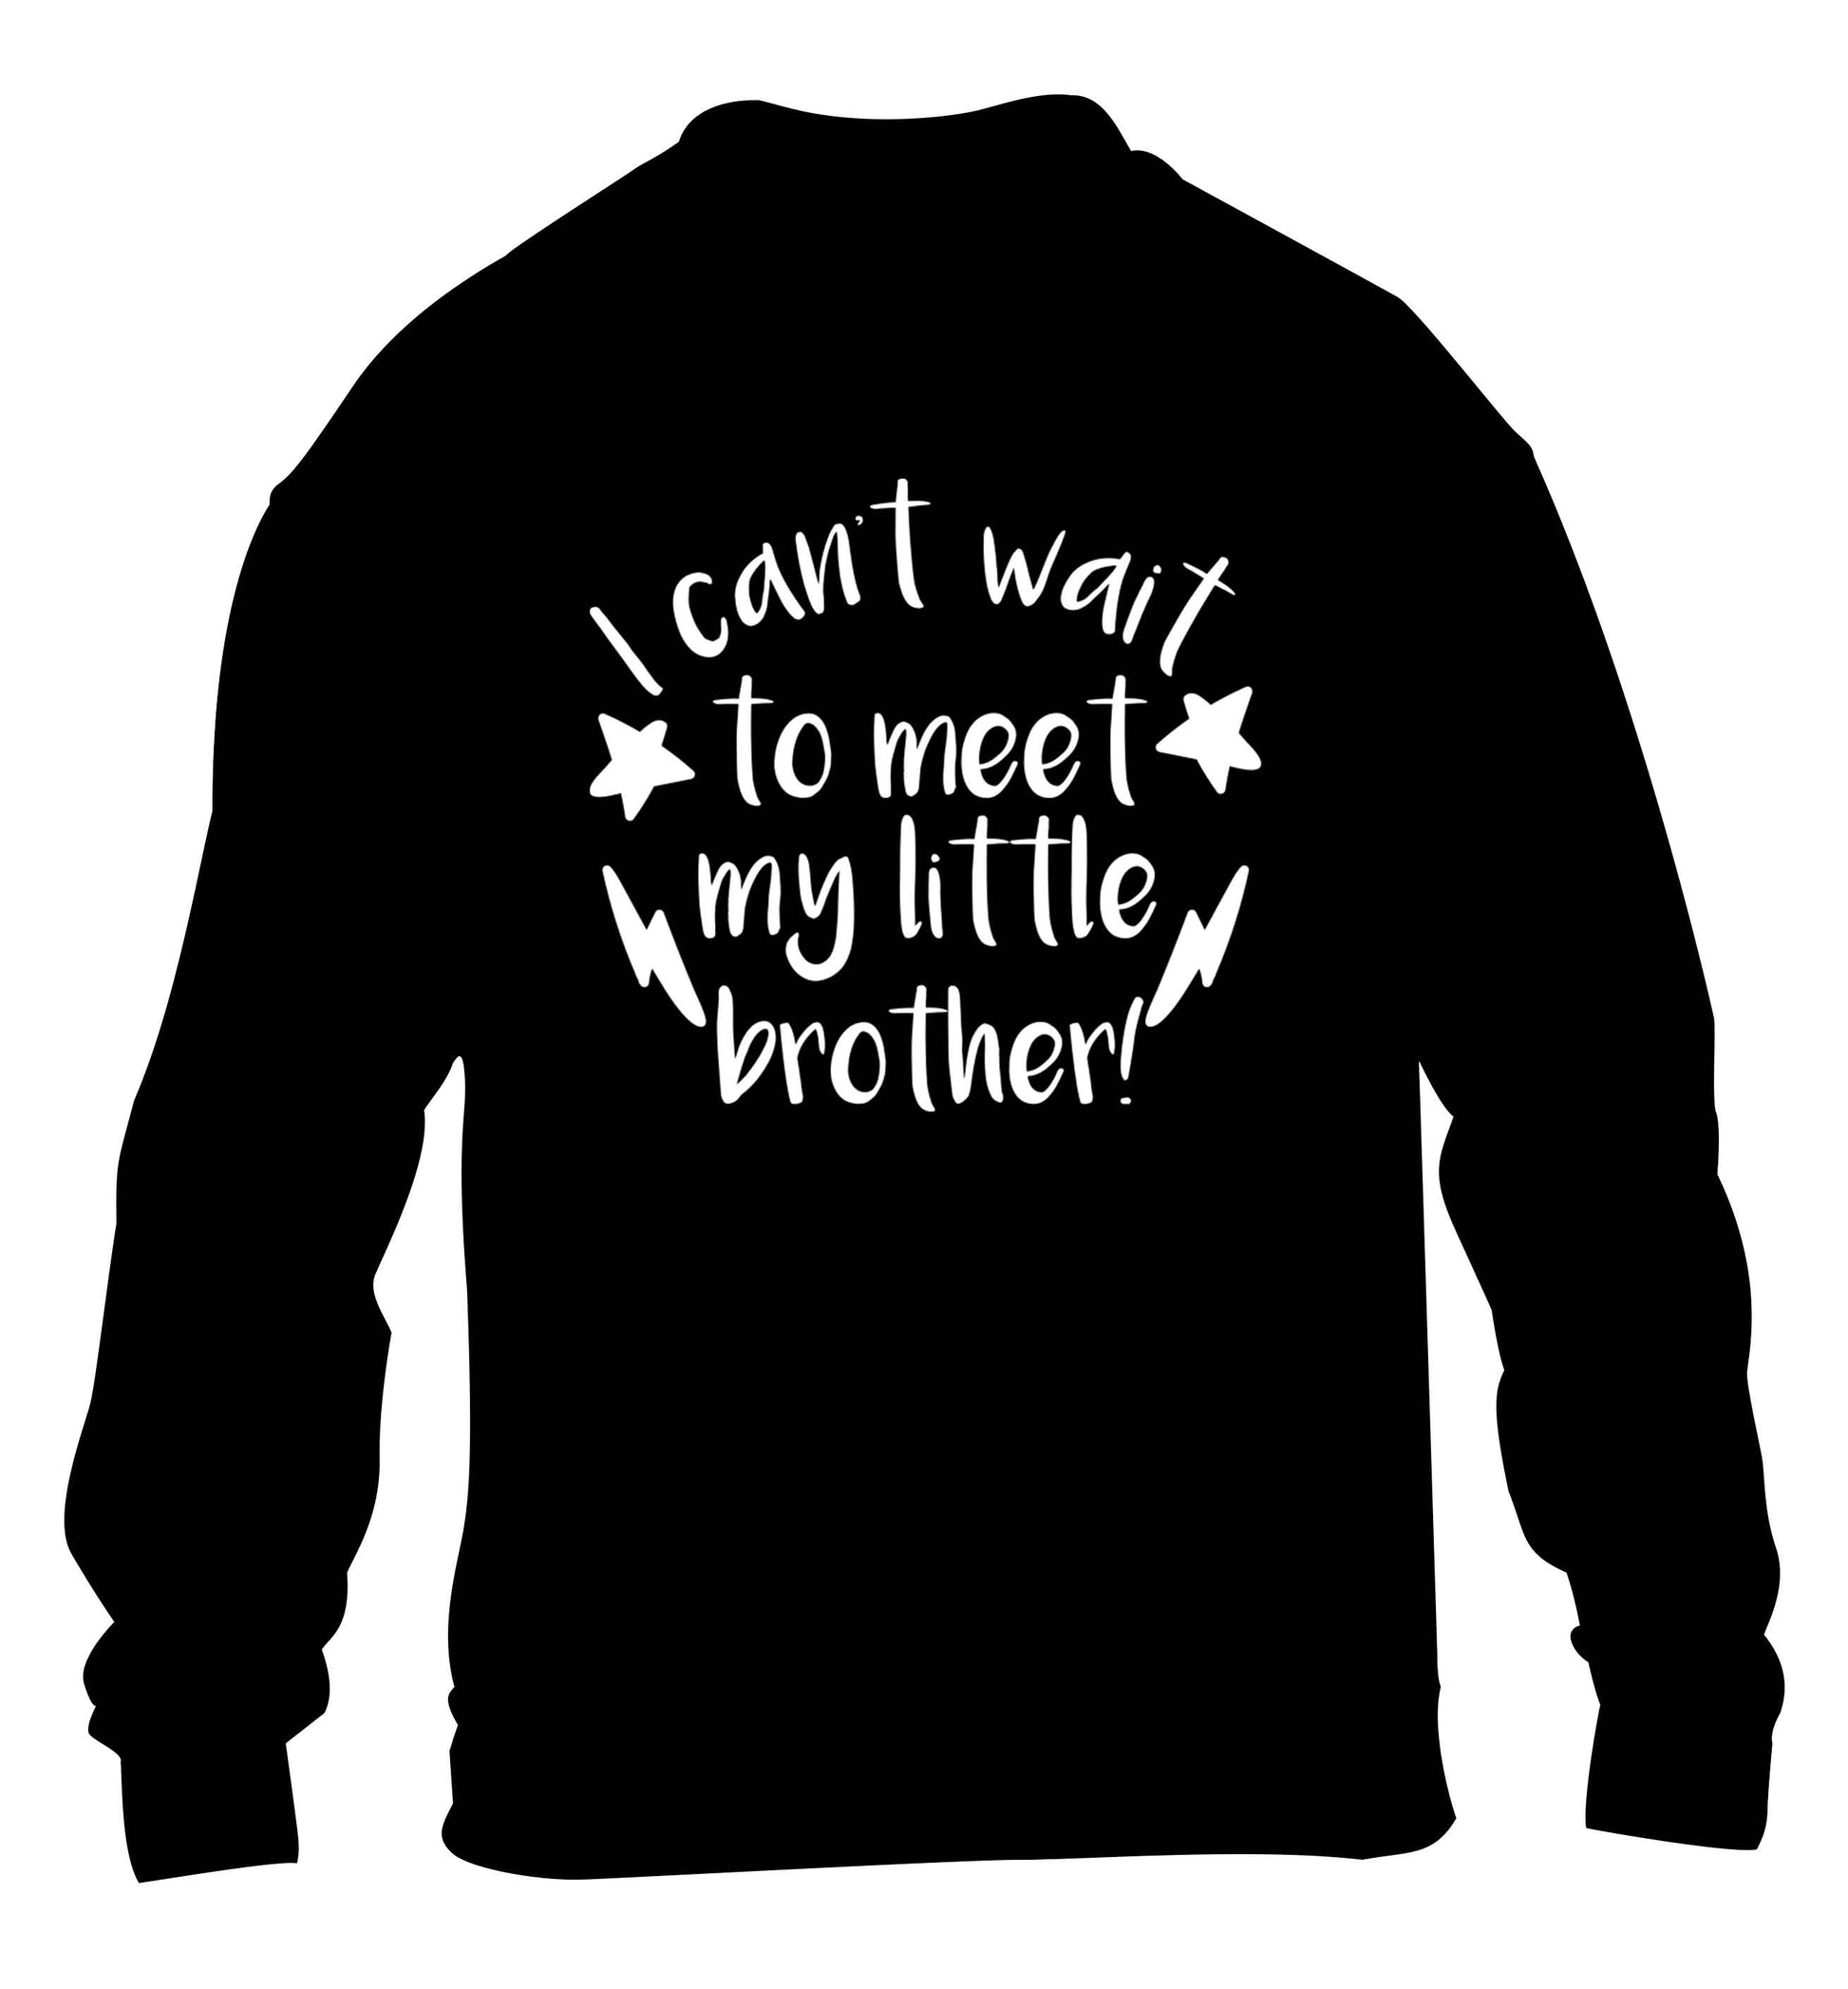 I can't wait to meet my sister! children's black sweater 12-13 Years